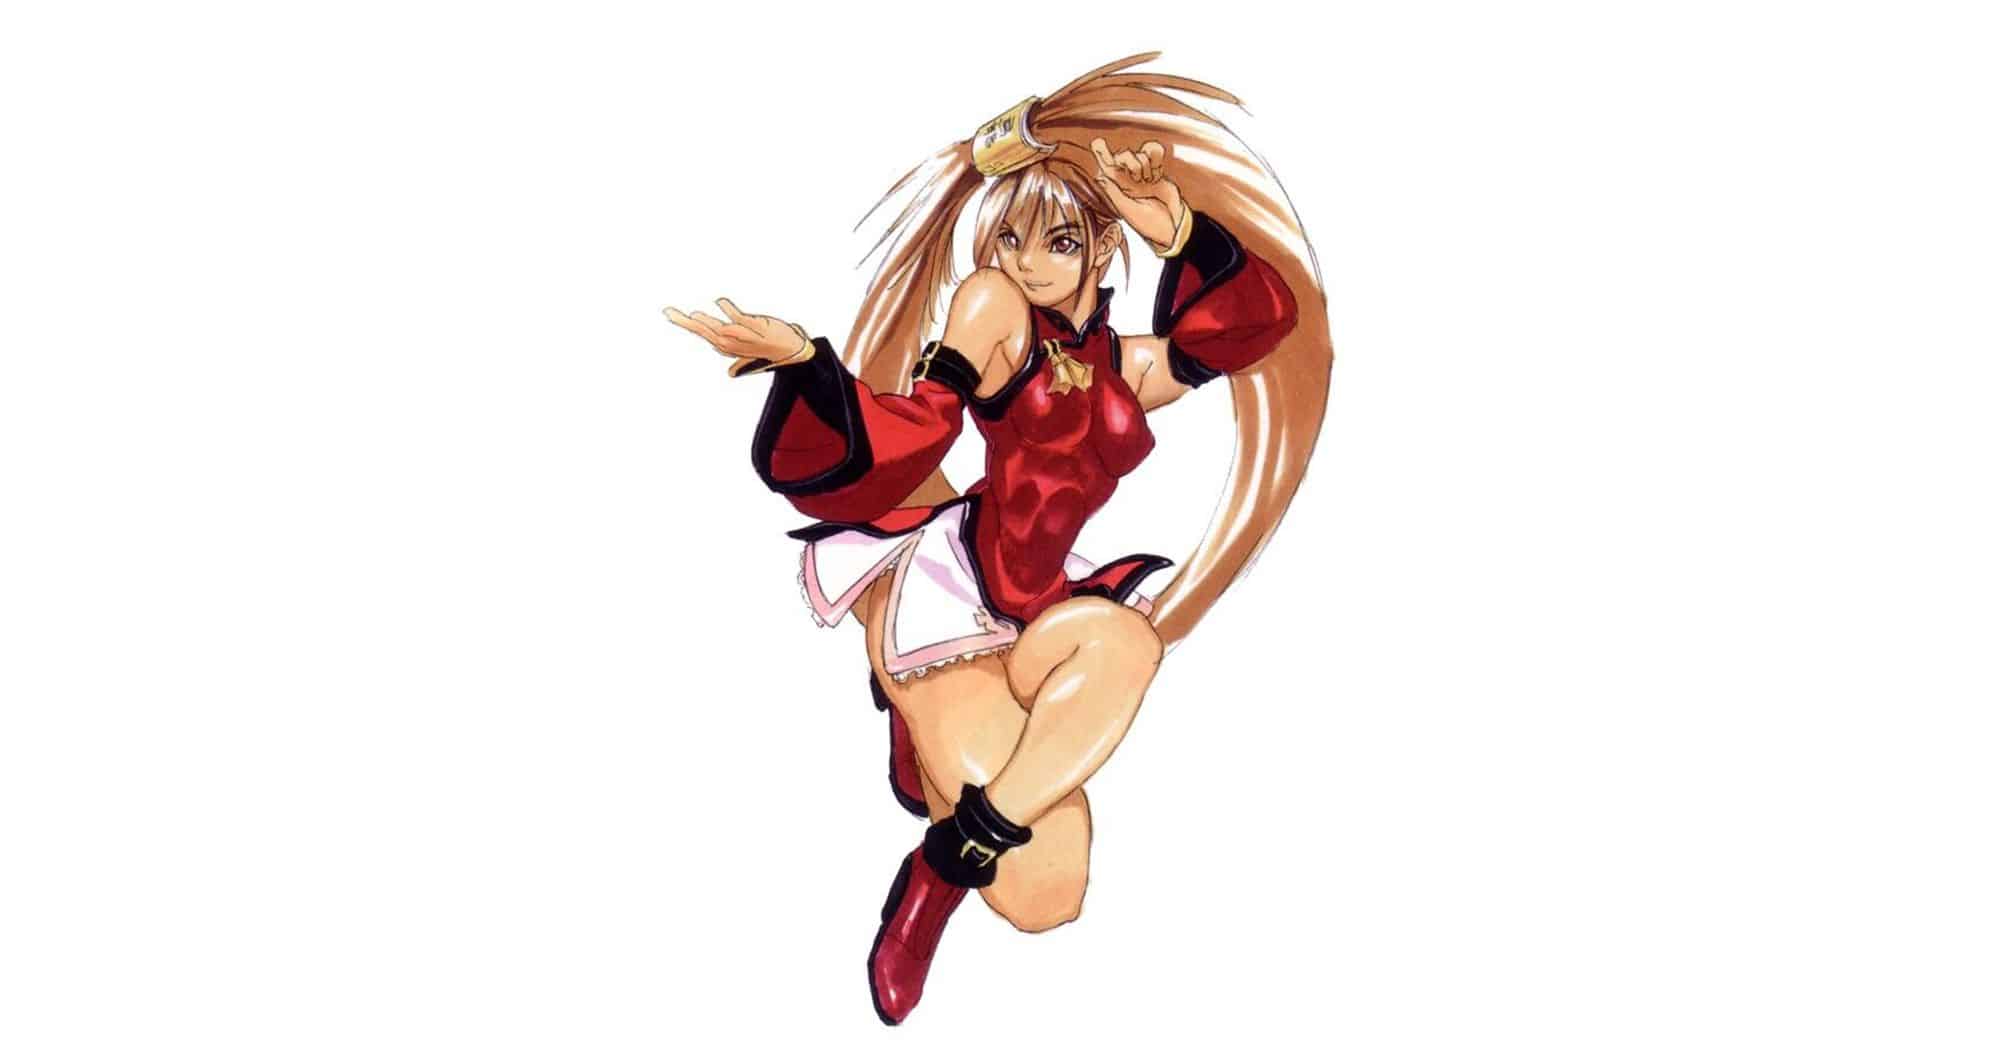 The most powerful guilty gear characters